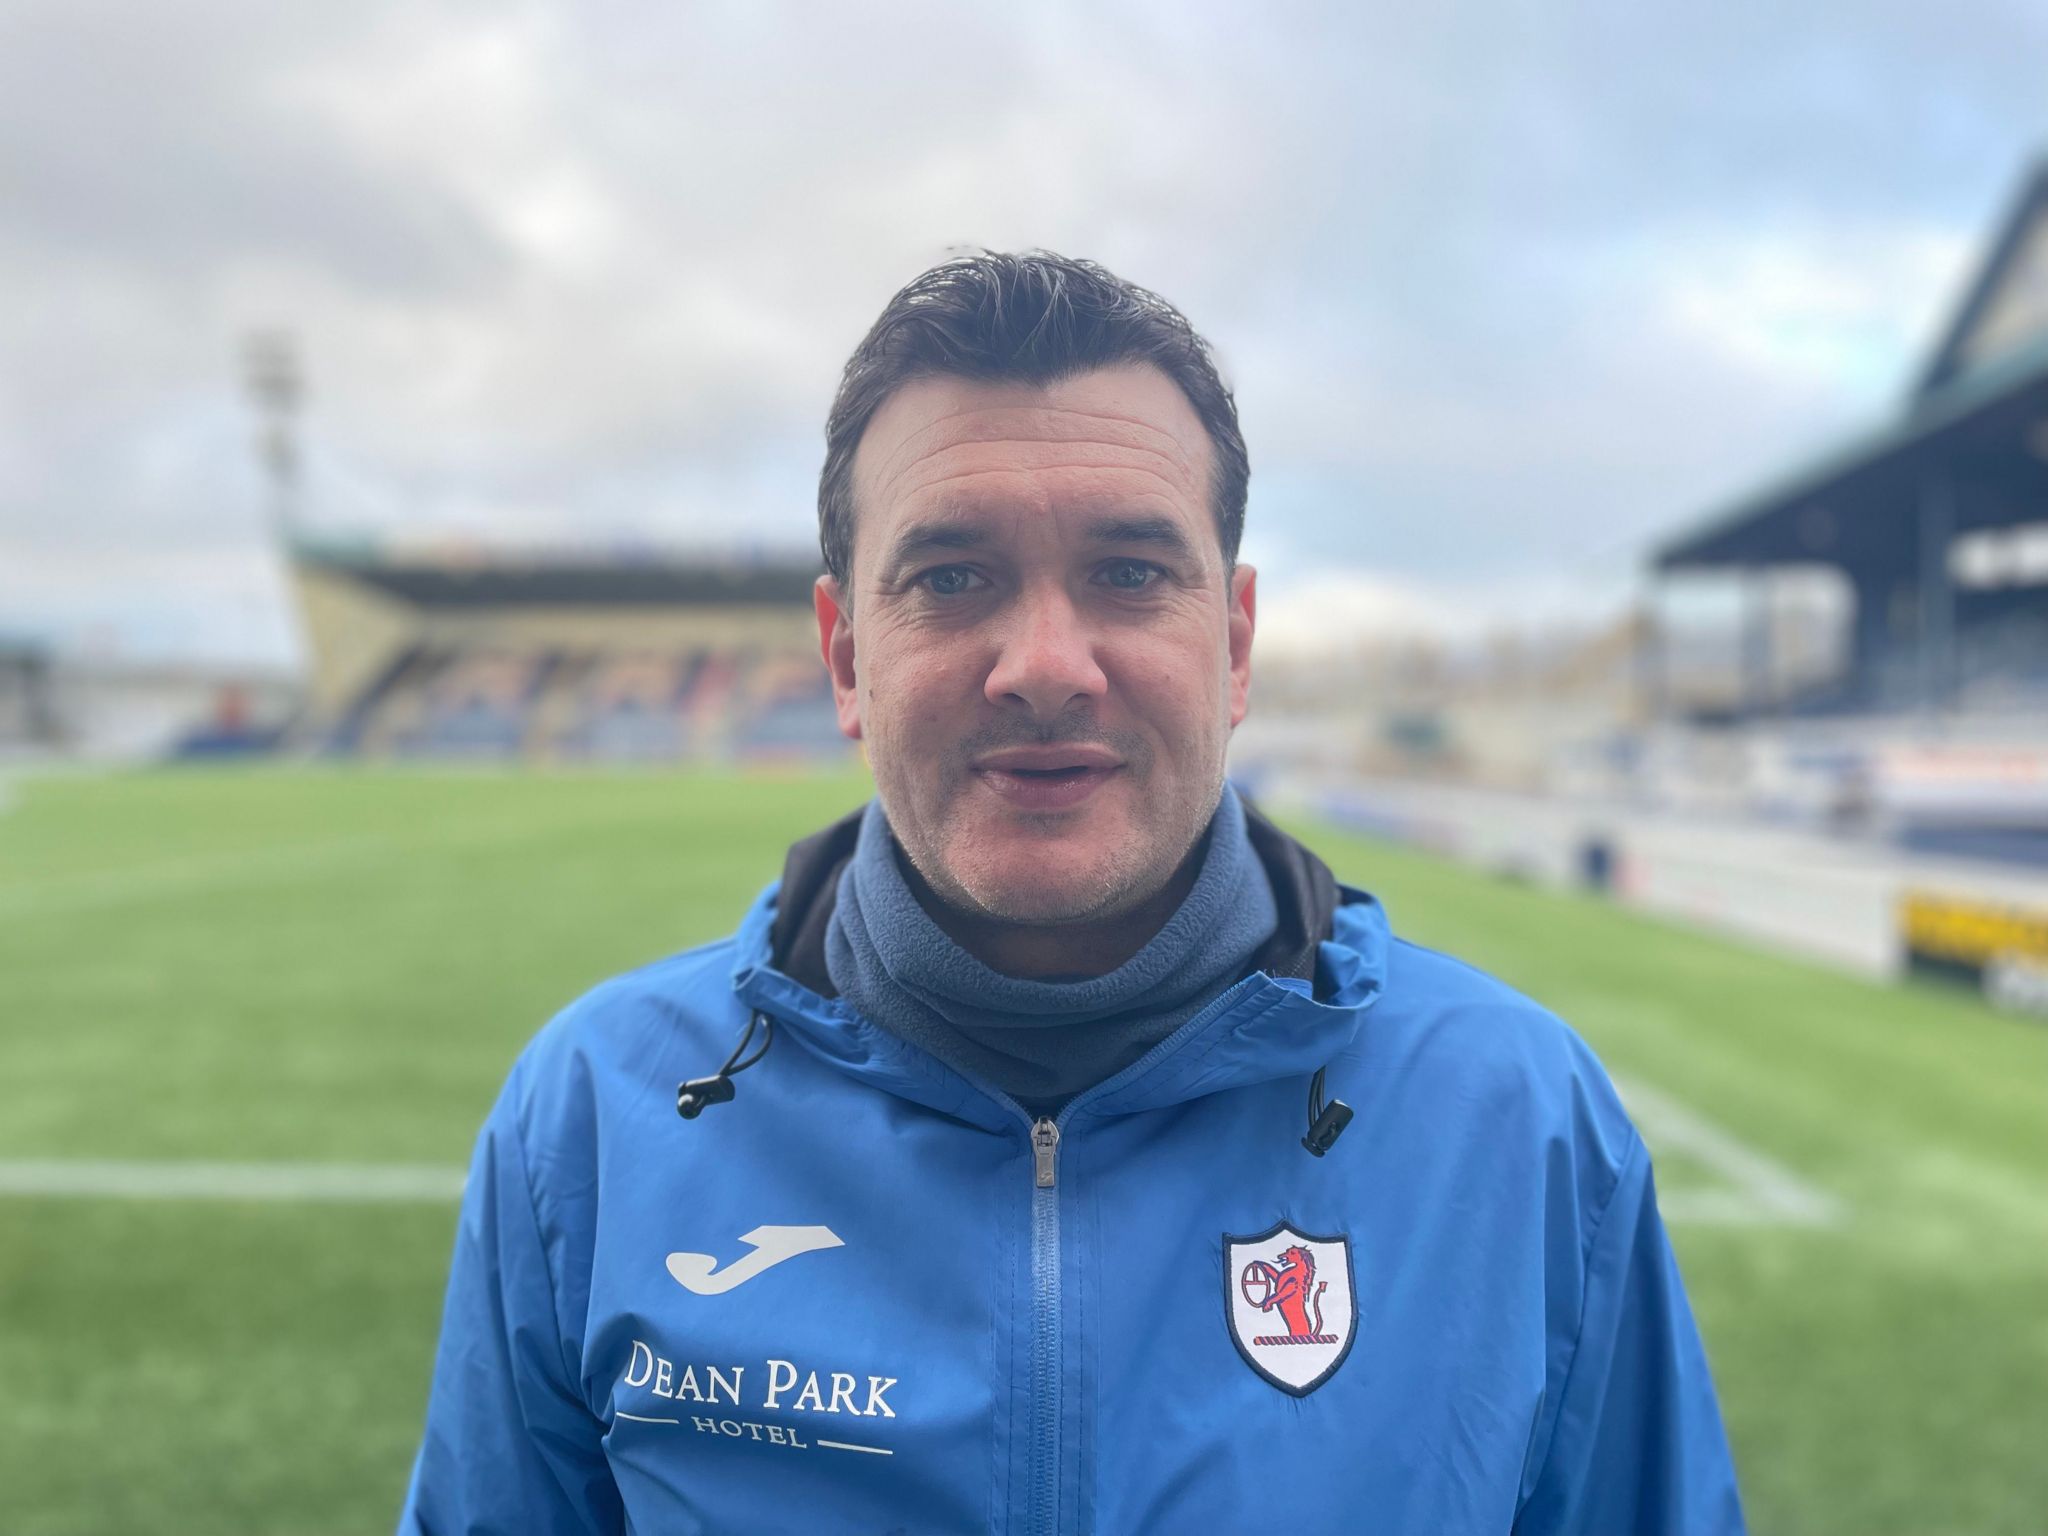 Raith manager, Ian Murray - man looking at camera, wearing a blue jacket with the club logo with a football pitch in the background out of focus.